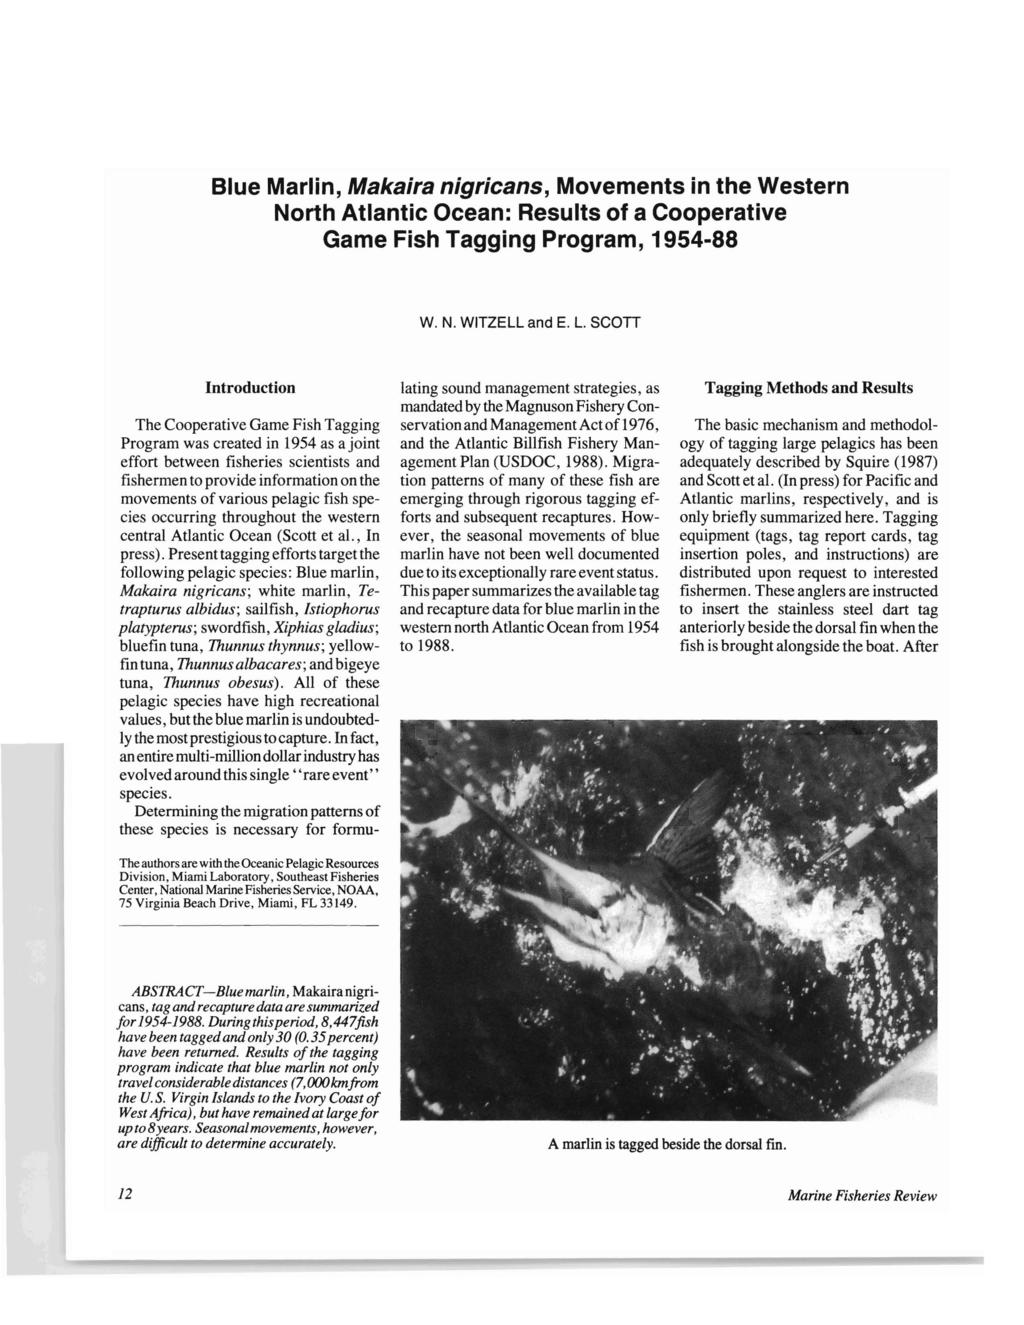 Blue Marlin, Makaira nigricans, Movements in the Western North Atlantic Ocean: Results of a Cooperative Game Fish Tagging Program, 1954-88 W. N. WITZELL and E. L.